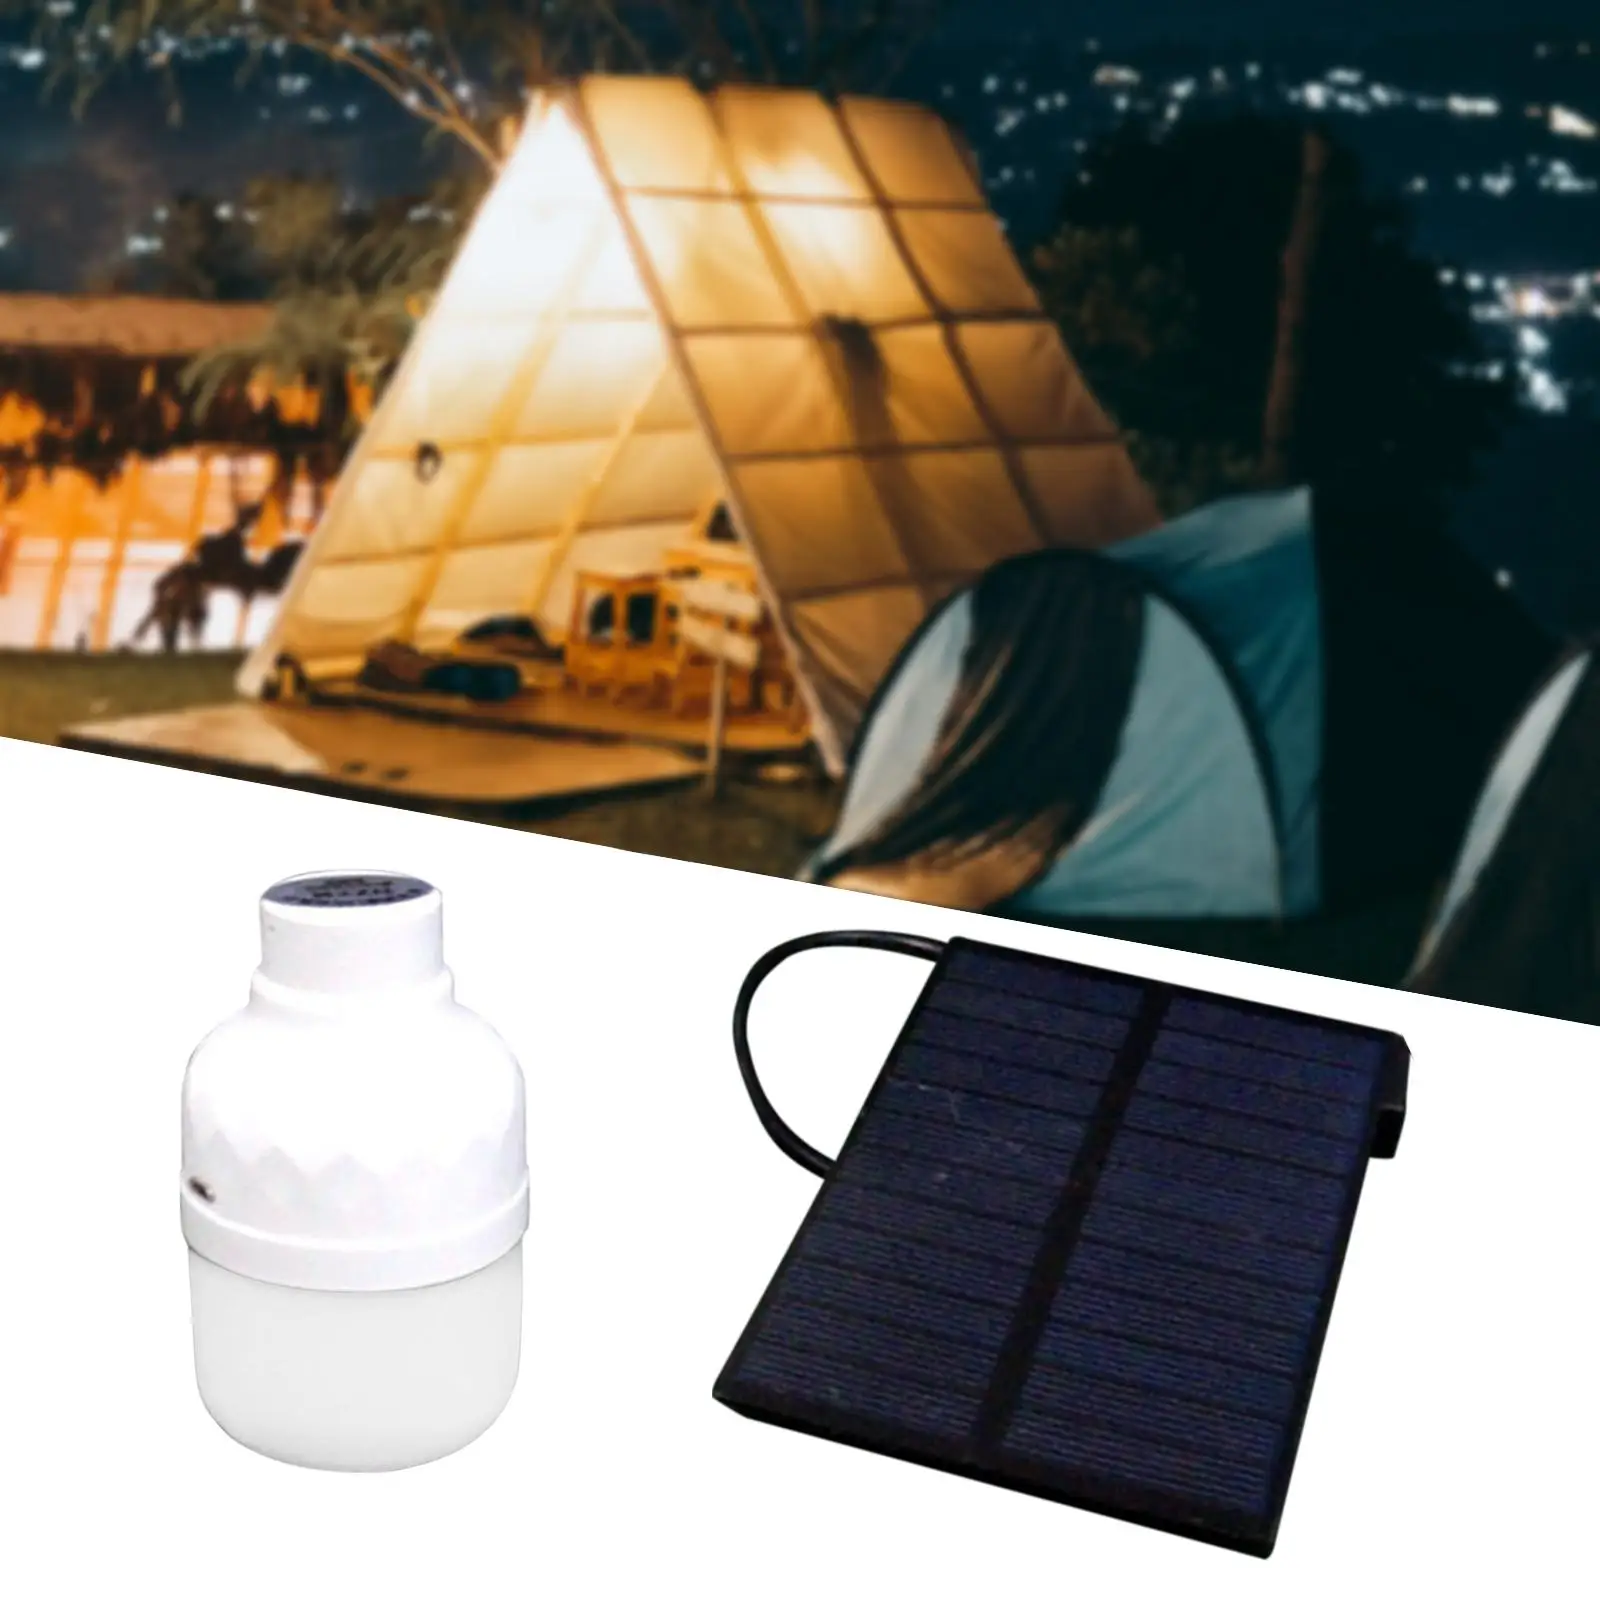 Portable LED Bulb Light Solar Powered Panel Camping USB Rechargeable Yard Tent